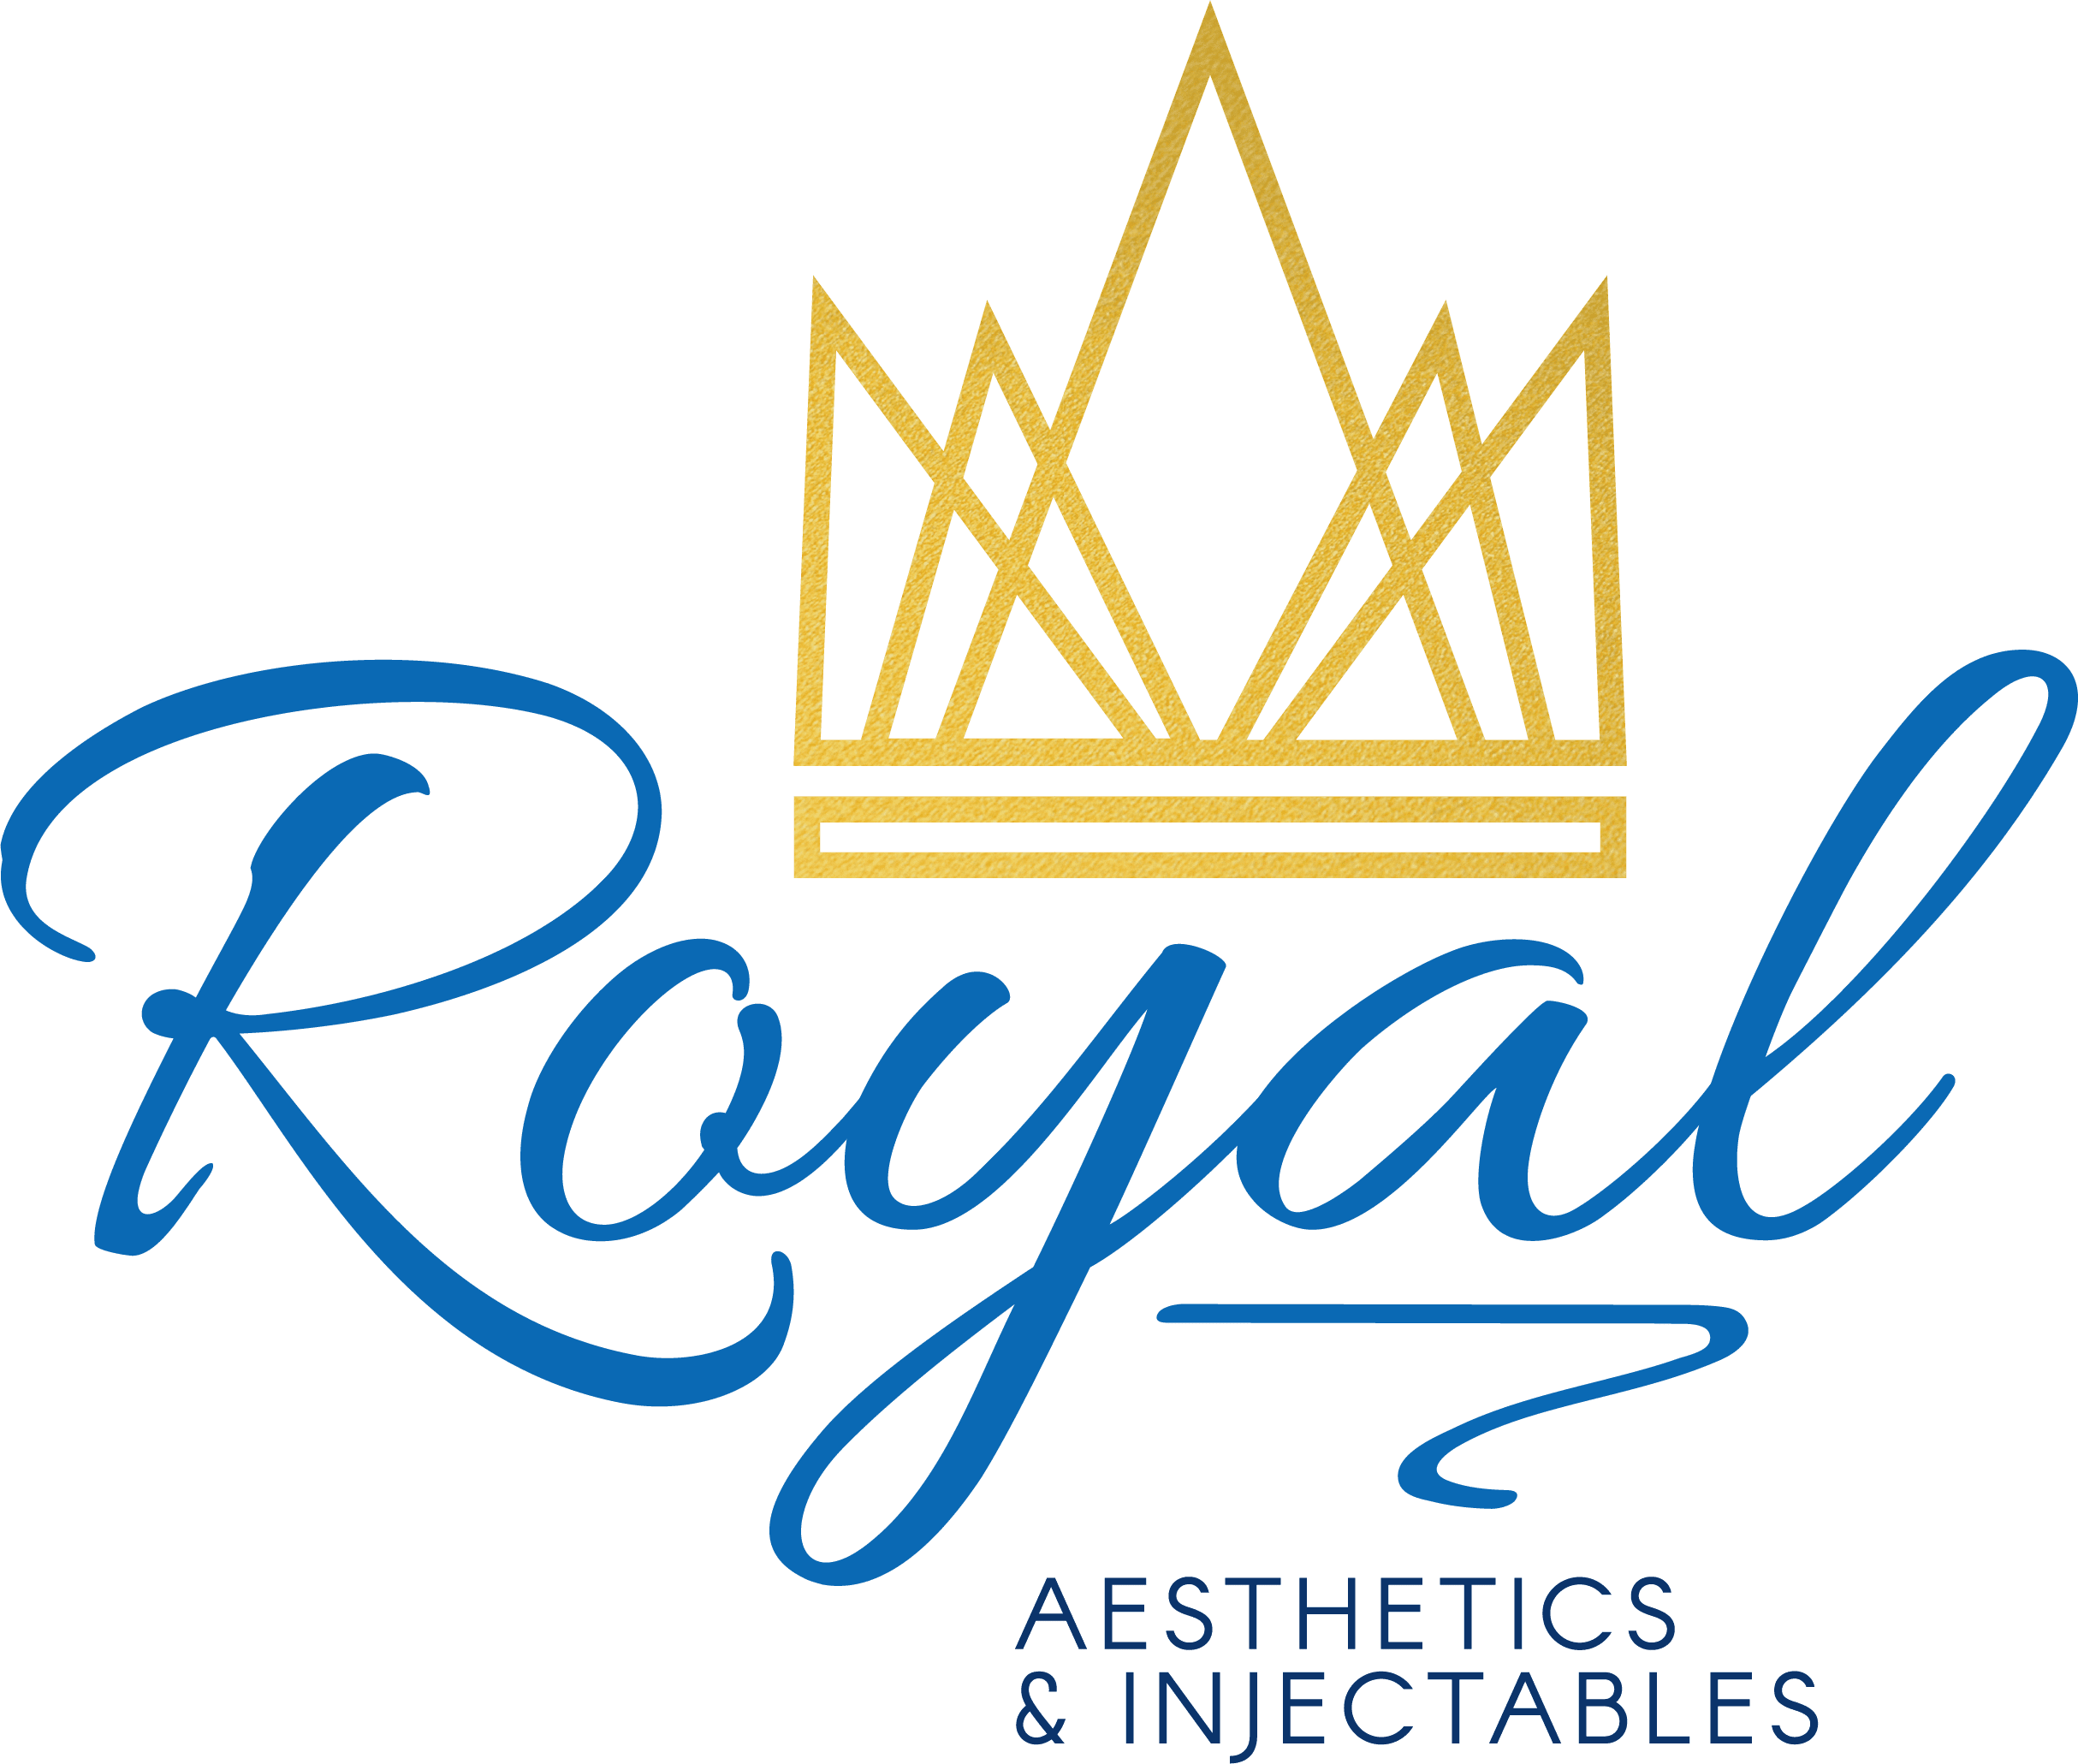 Royal Aesthetics & Injectables